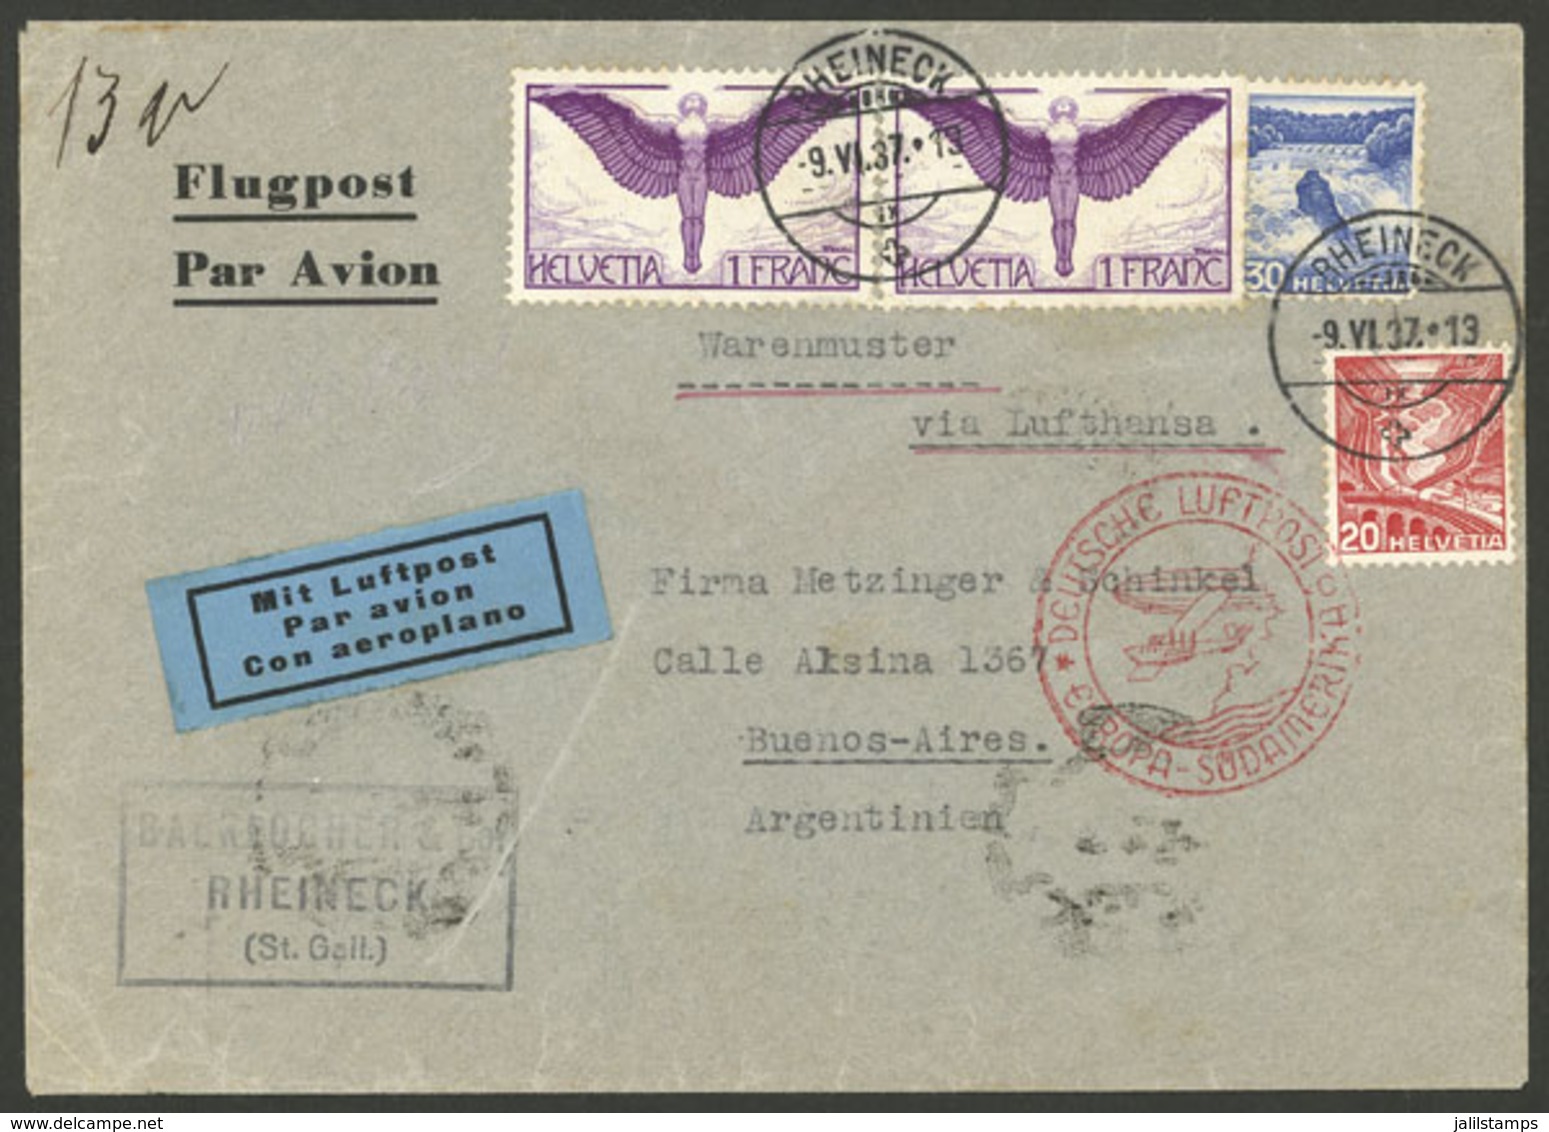 SWITZERLAND: 9/JUN/1937 Rheineck - Argentina, Airmail Cover Sent By German DLH With Postage Of SAMPLES WITHOUT VALUE (2. - Briefe U. Dokumente